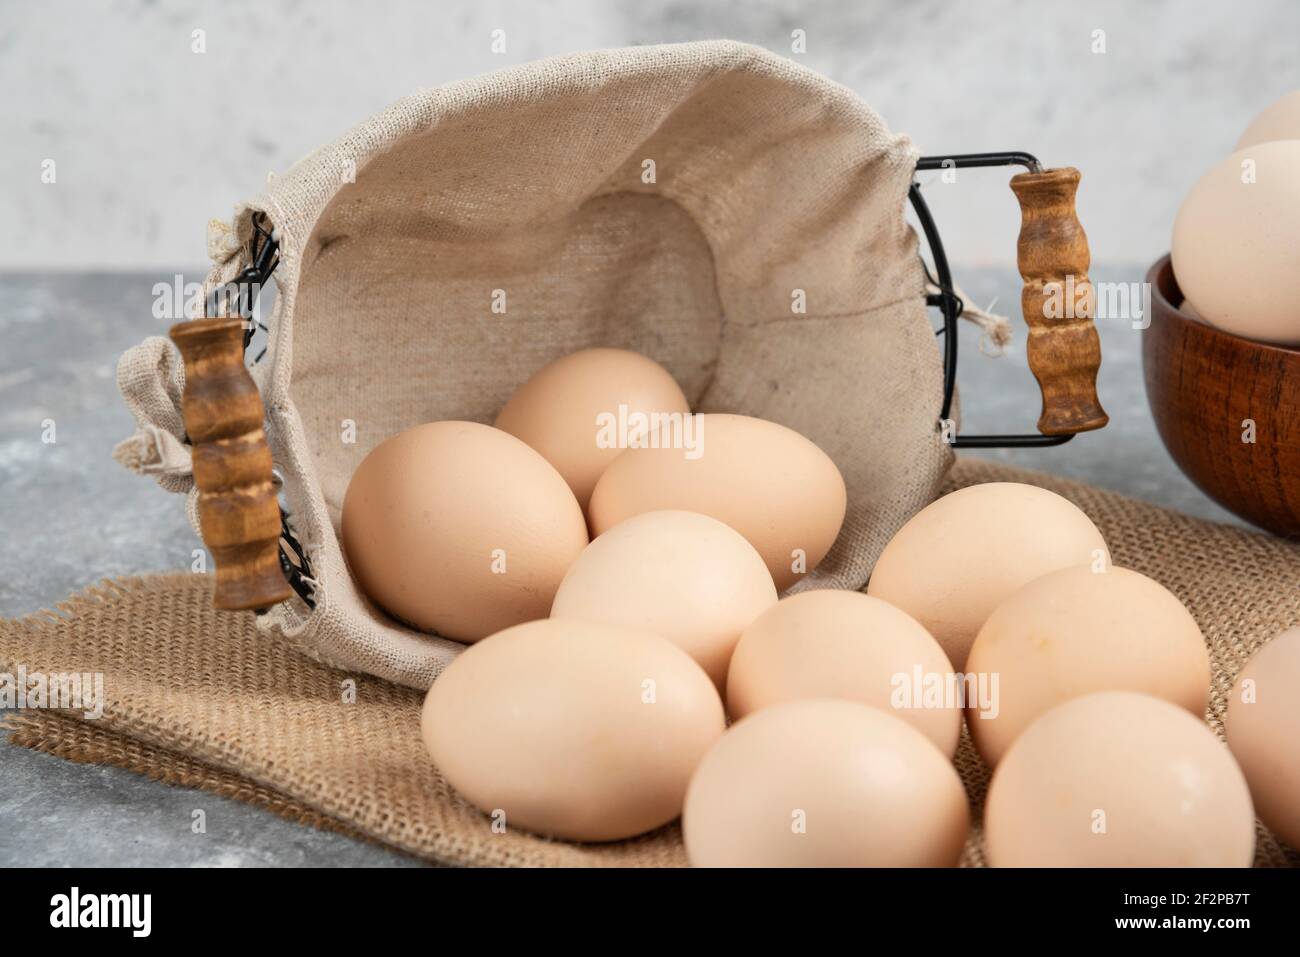 Basket and bowl full of organic fresh uncooked eggs on marble surface Stock Photo